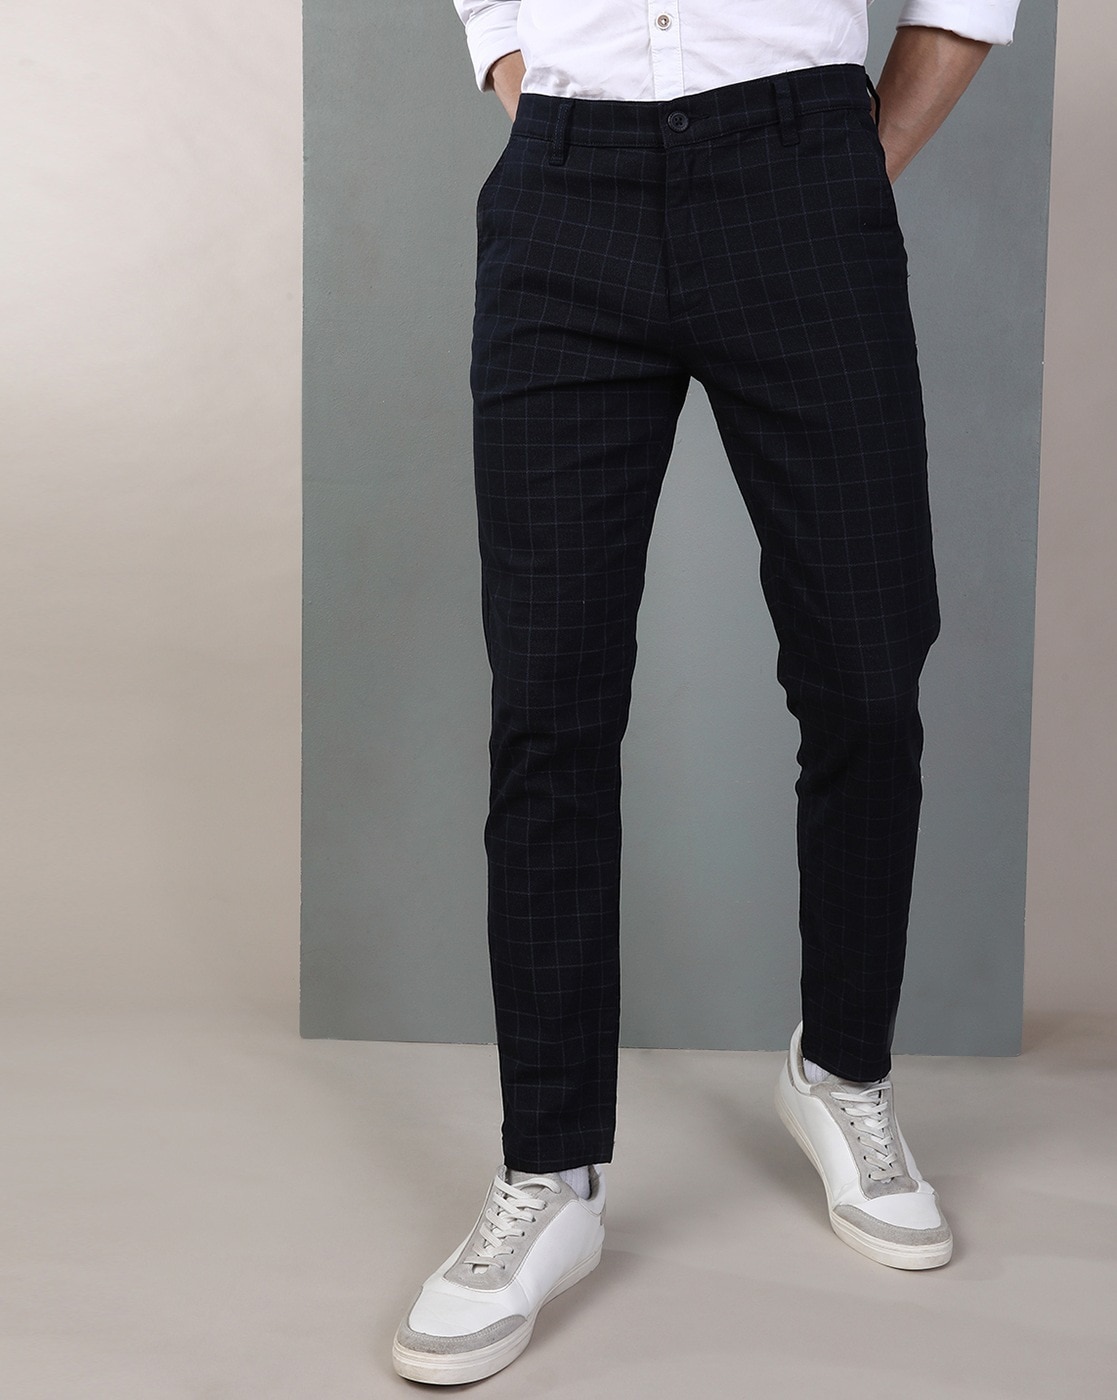 How To Wear Check Trousers Without Looking Like A Golfer  FashionBeans